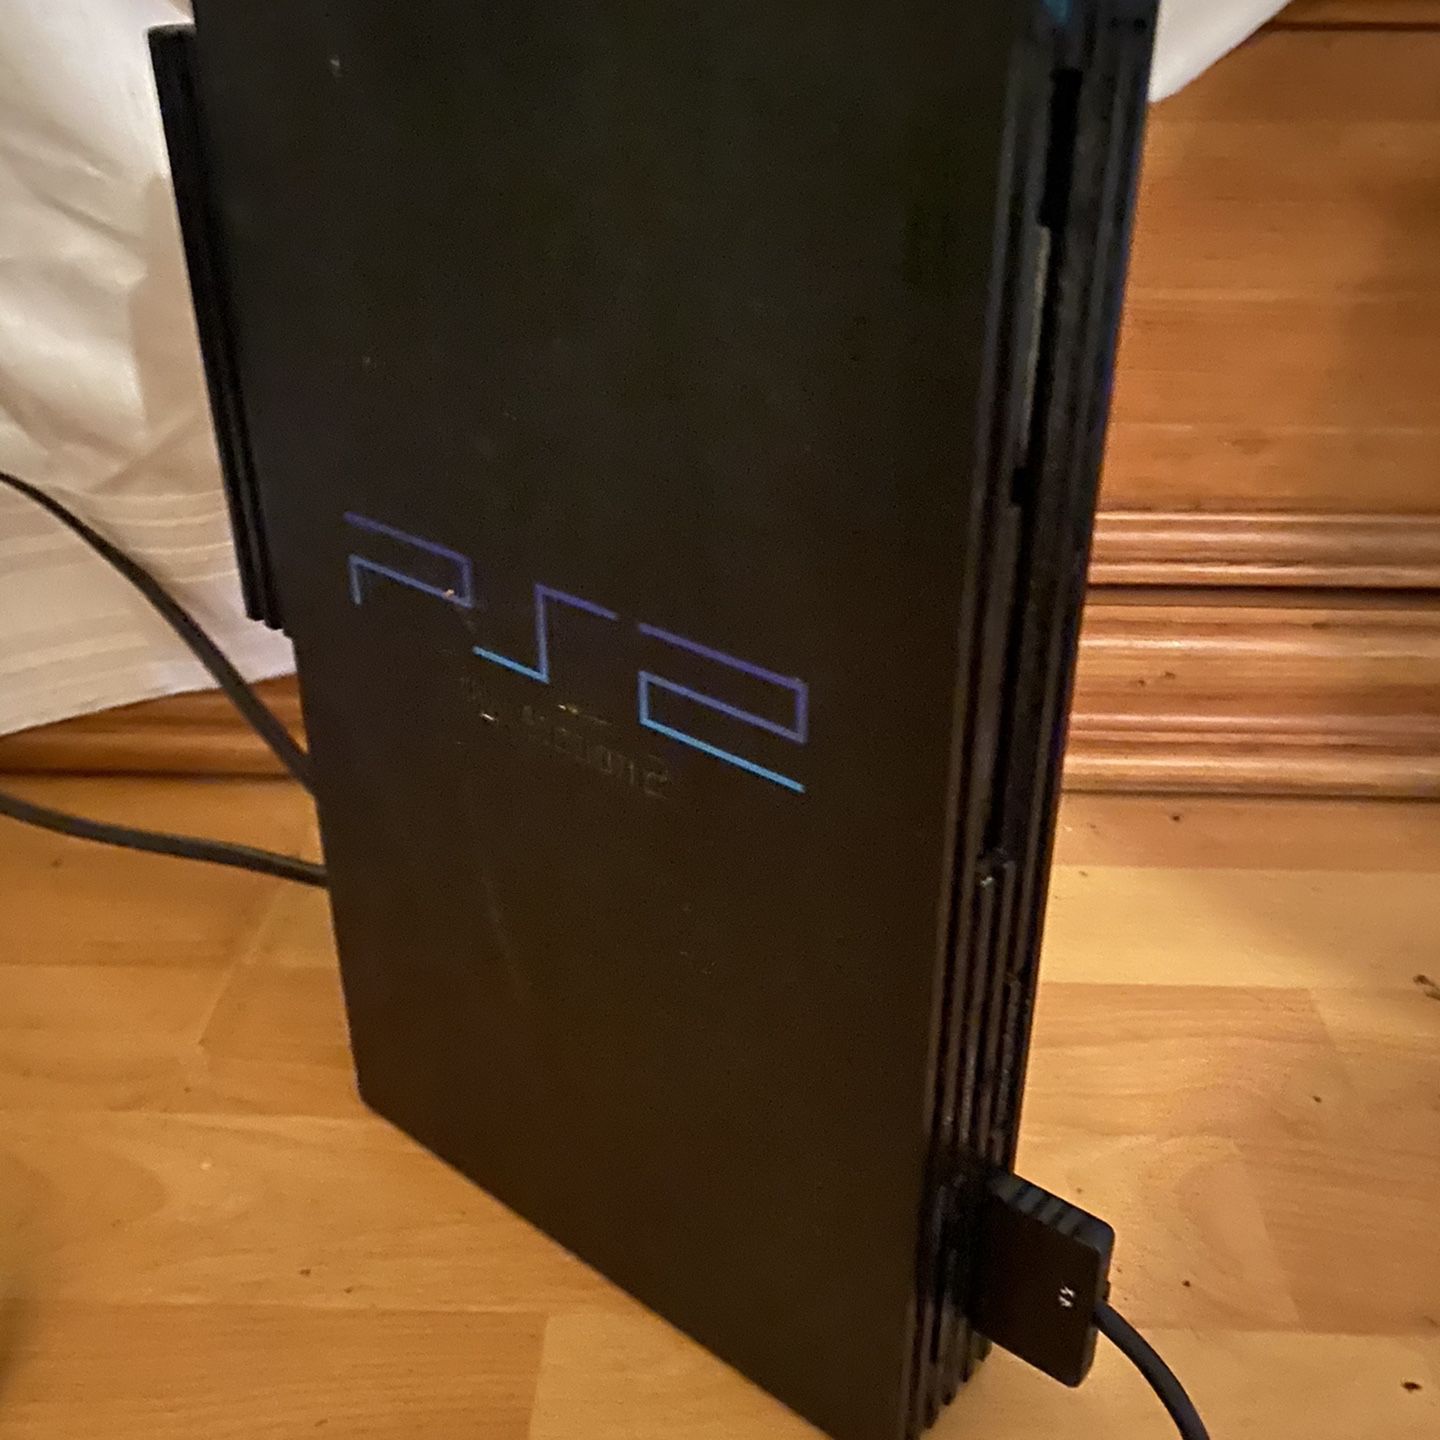 PlayStation 2, Controller, Cords And Games